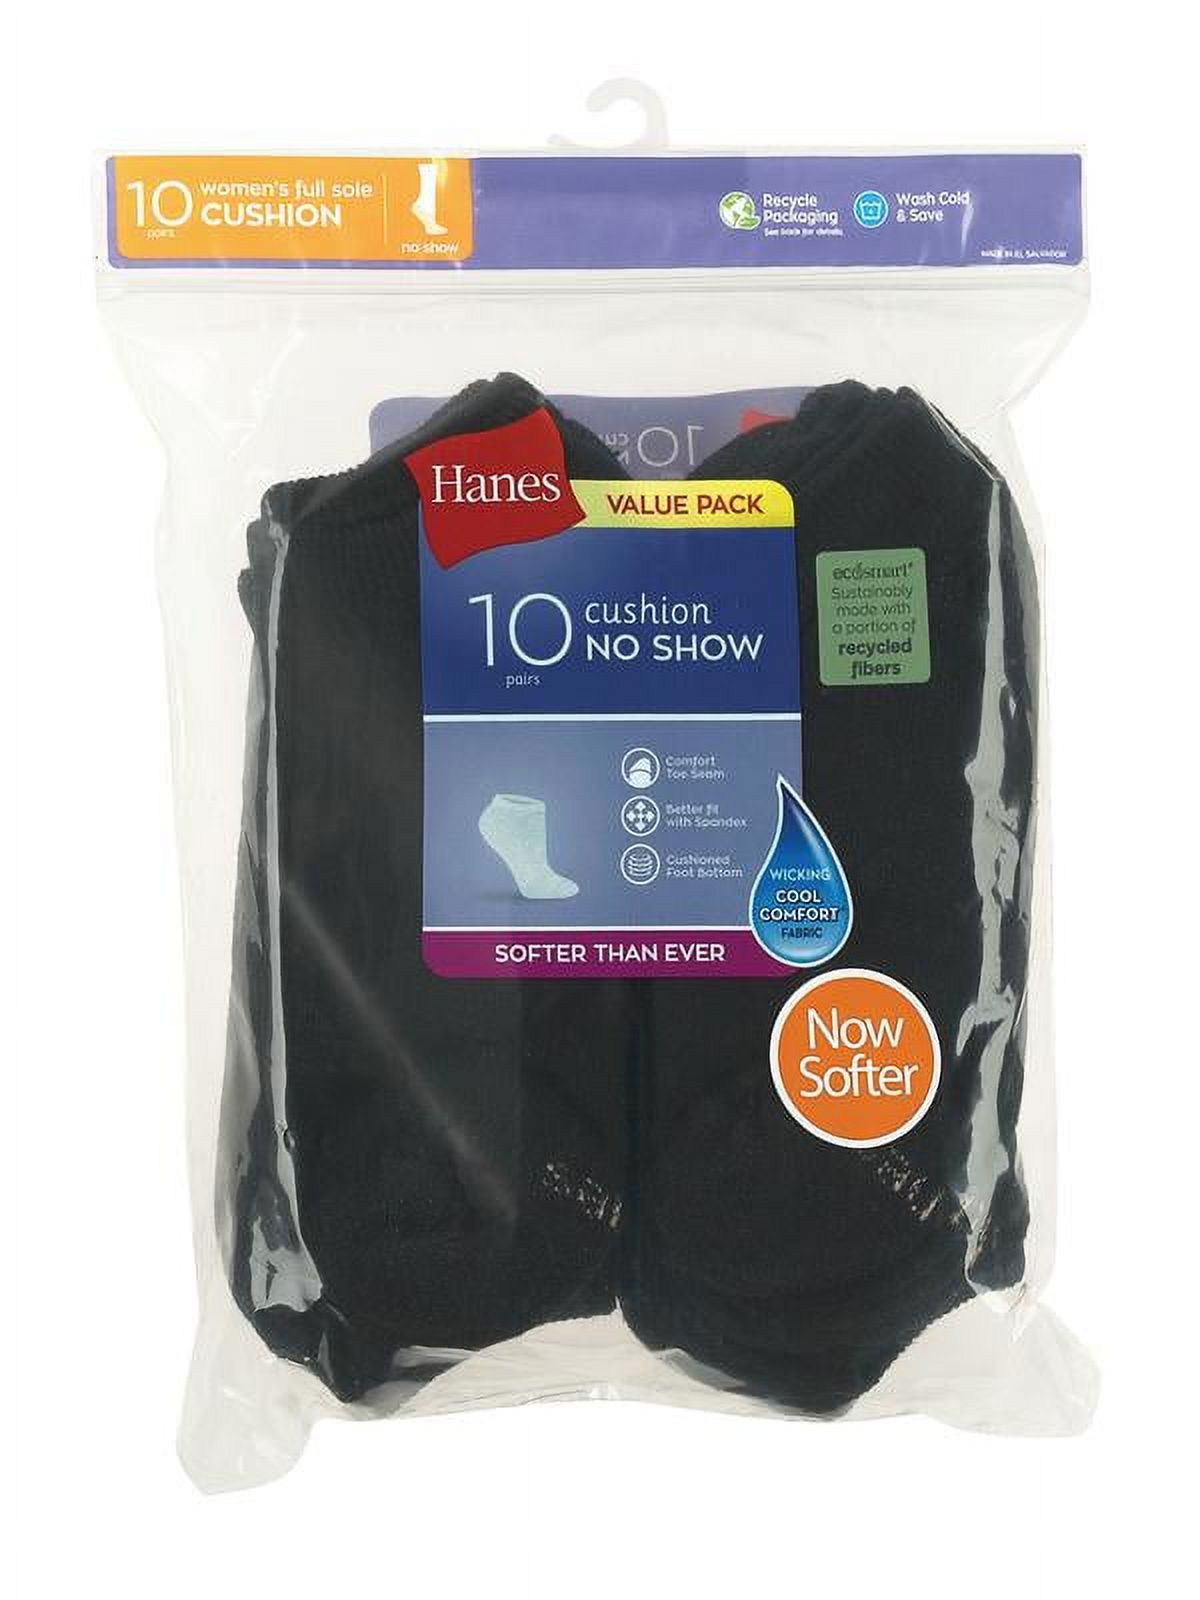 Hanes Women's Cool Comfort No Show Socks, Extended Size 10-Pair Value Pack - image 2 of 6